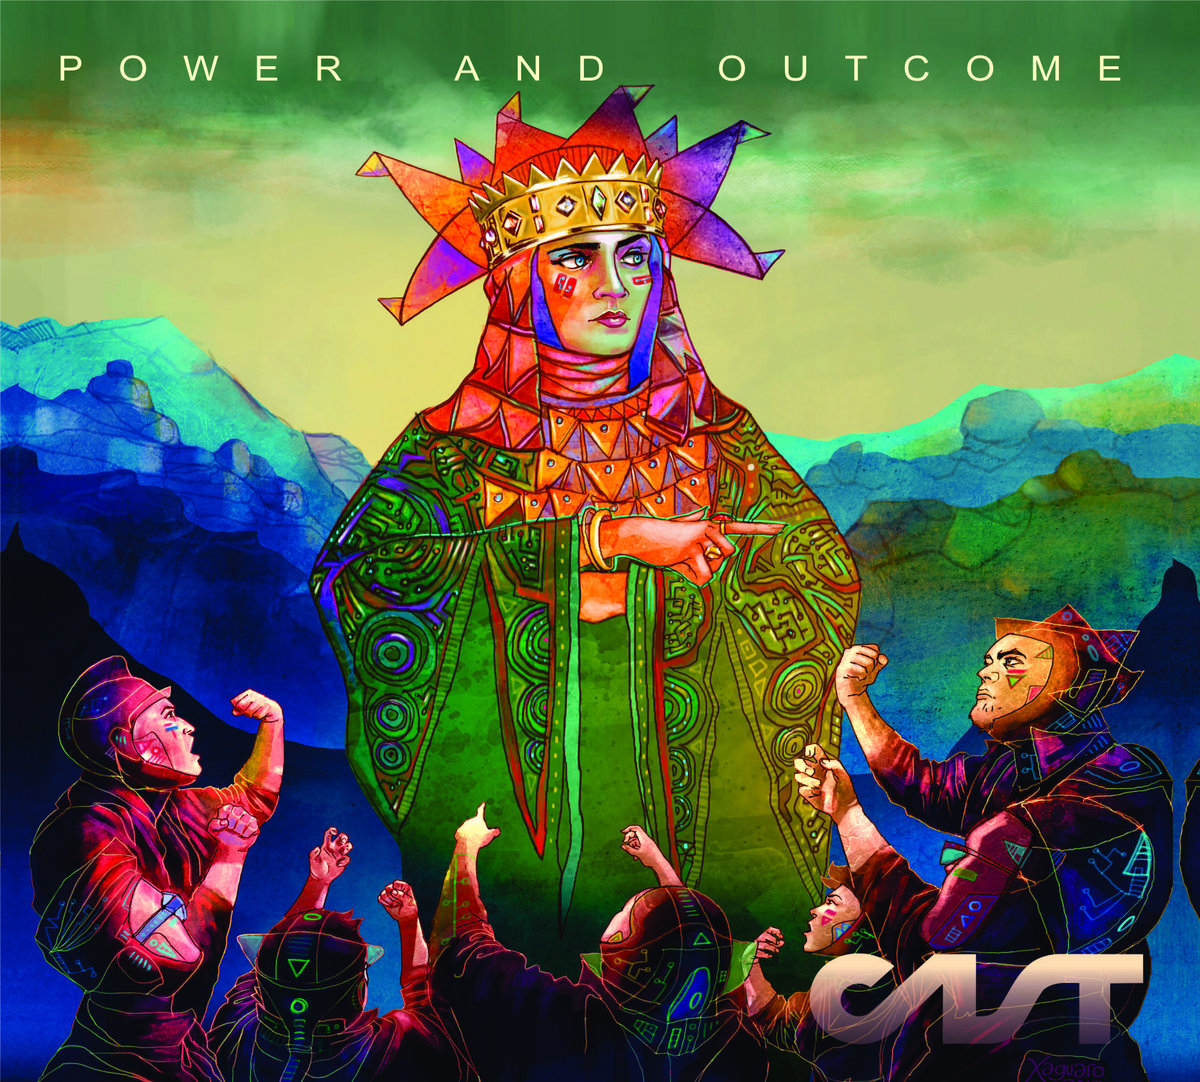 Cast: Power and Outcome